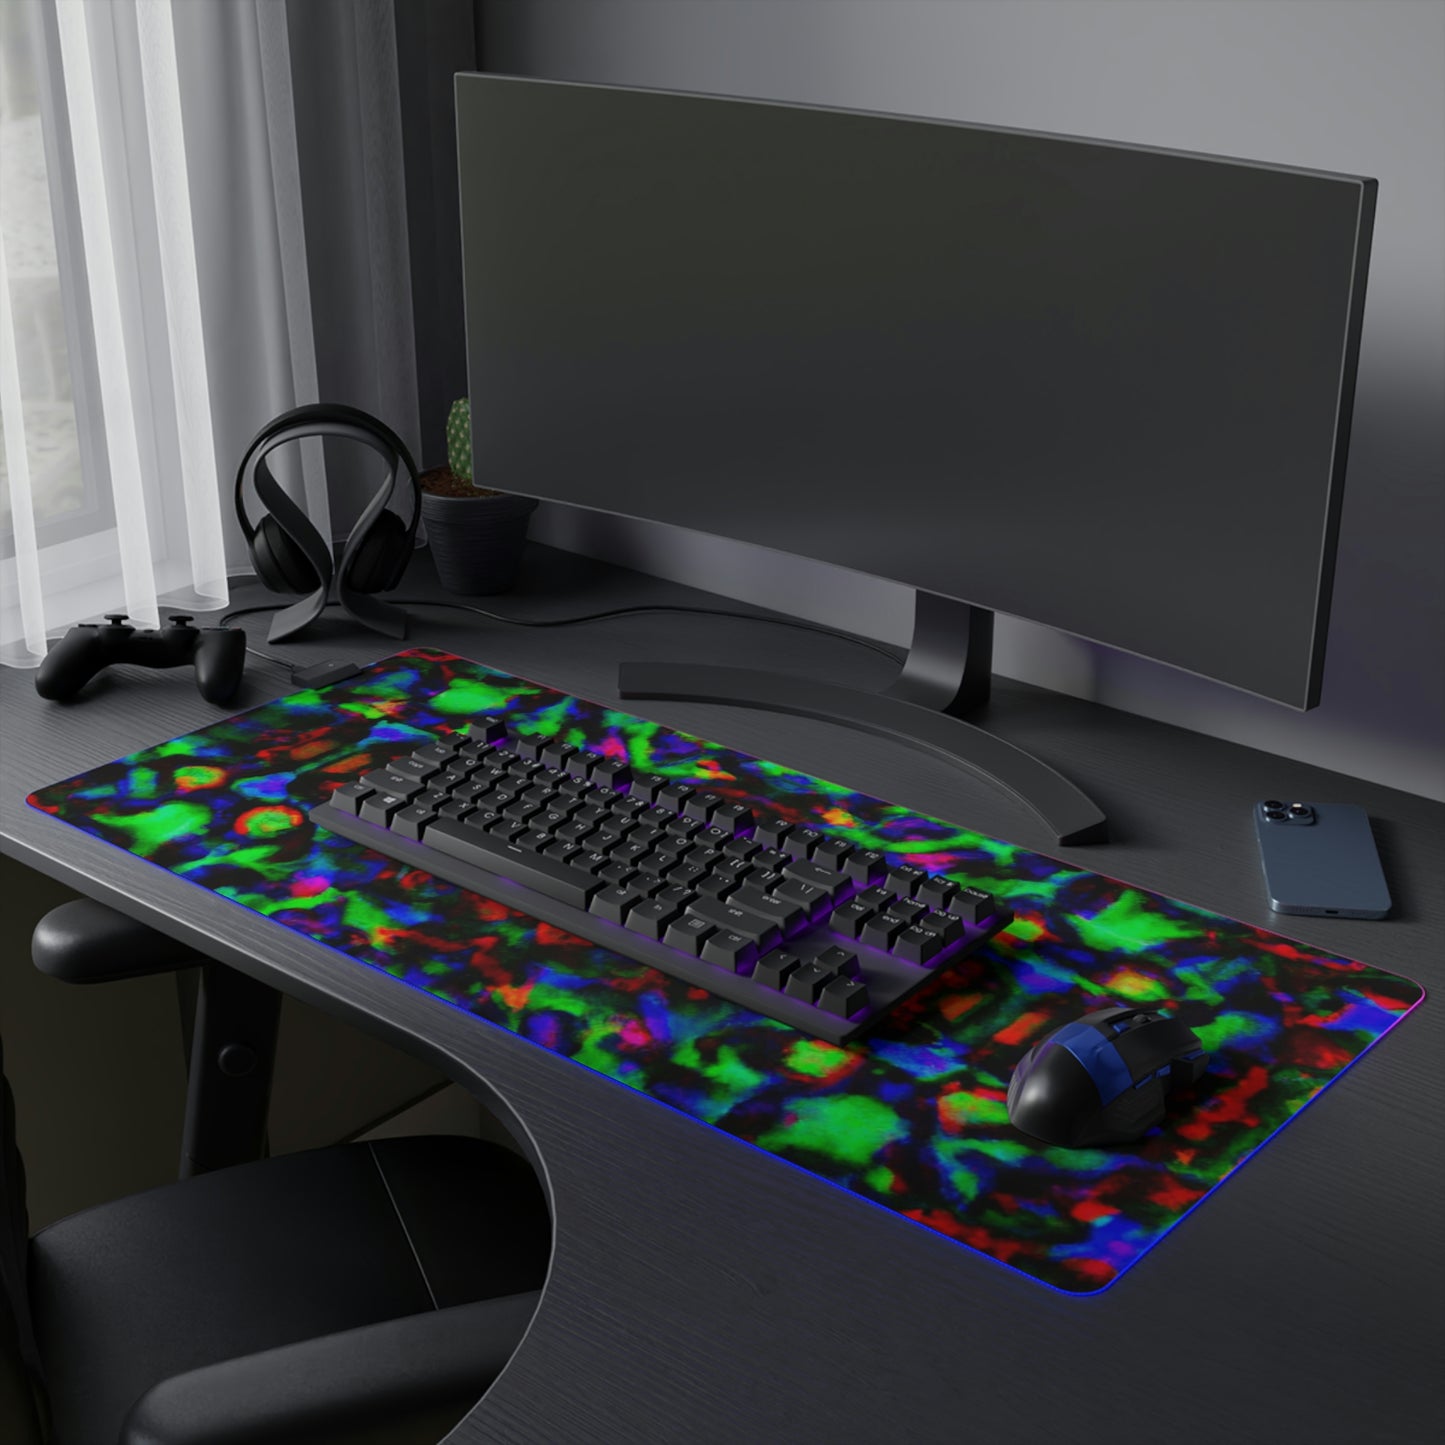 Tin-Tin the Robot - Psychedelic Trippy LED Light Up Gaming Mouse Pad